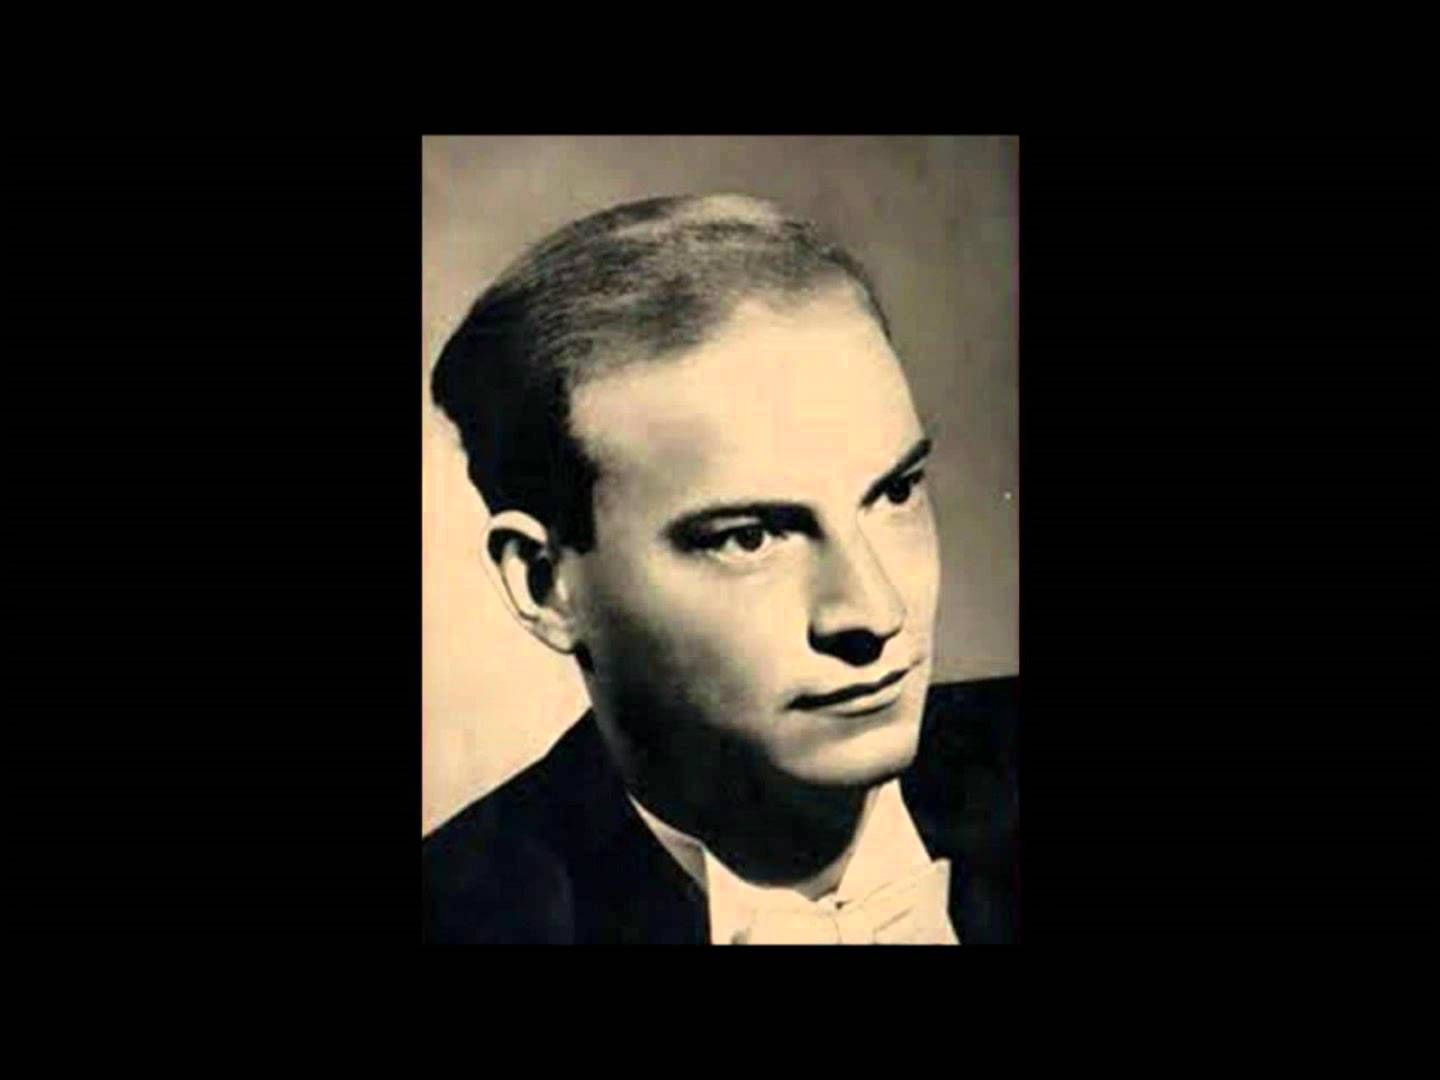 Death of sought-after Hungarian pianist, 97